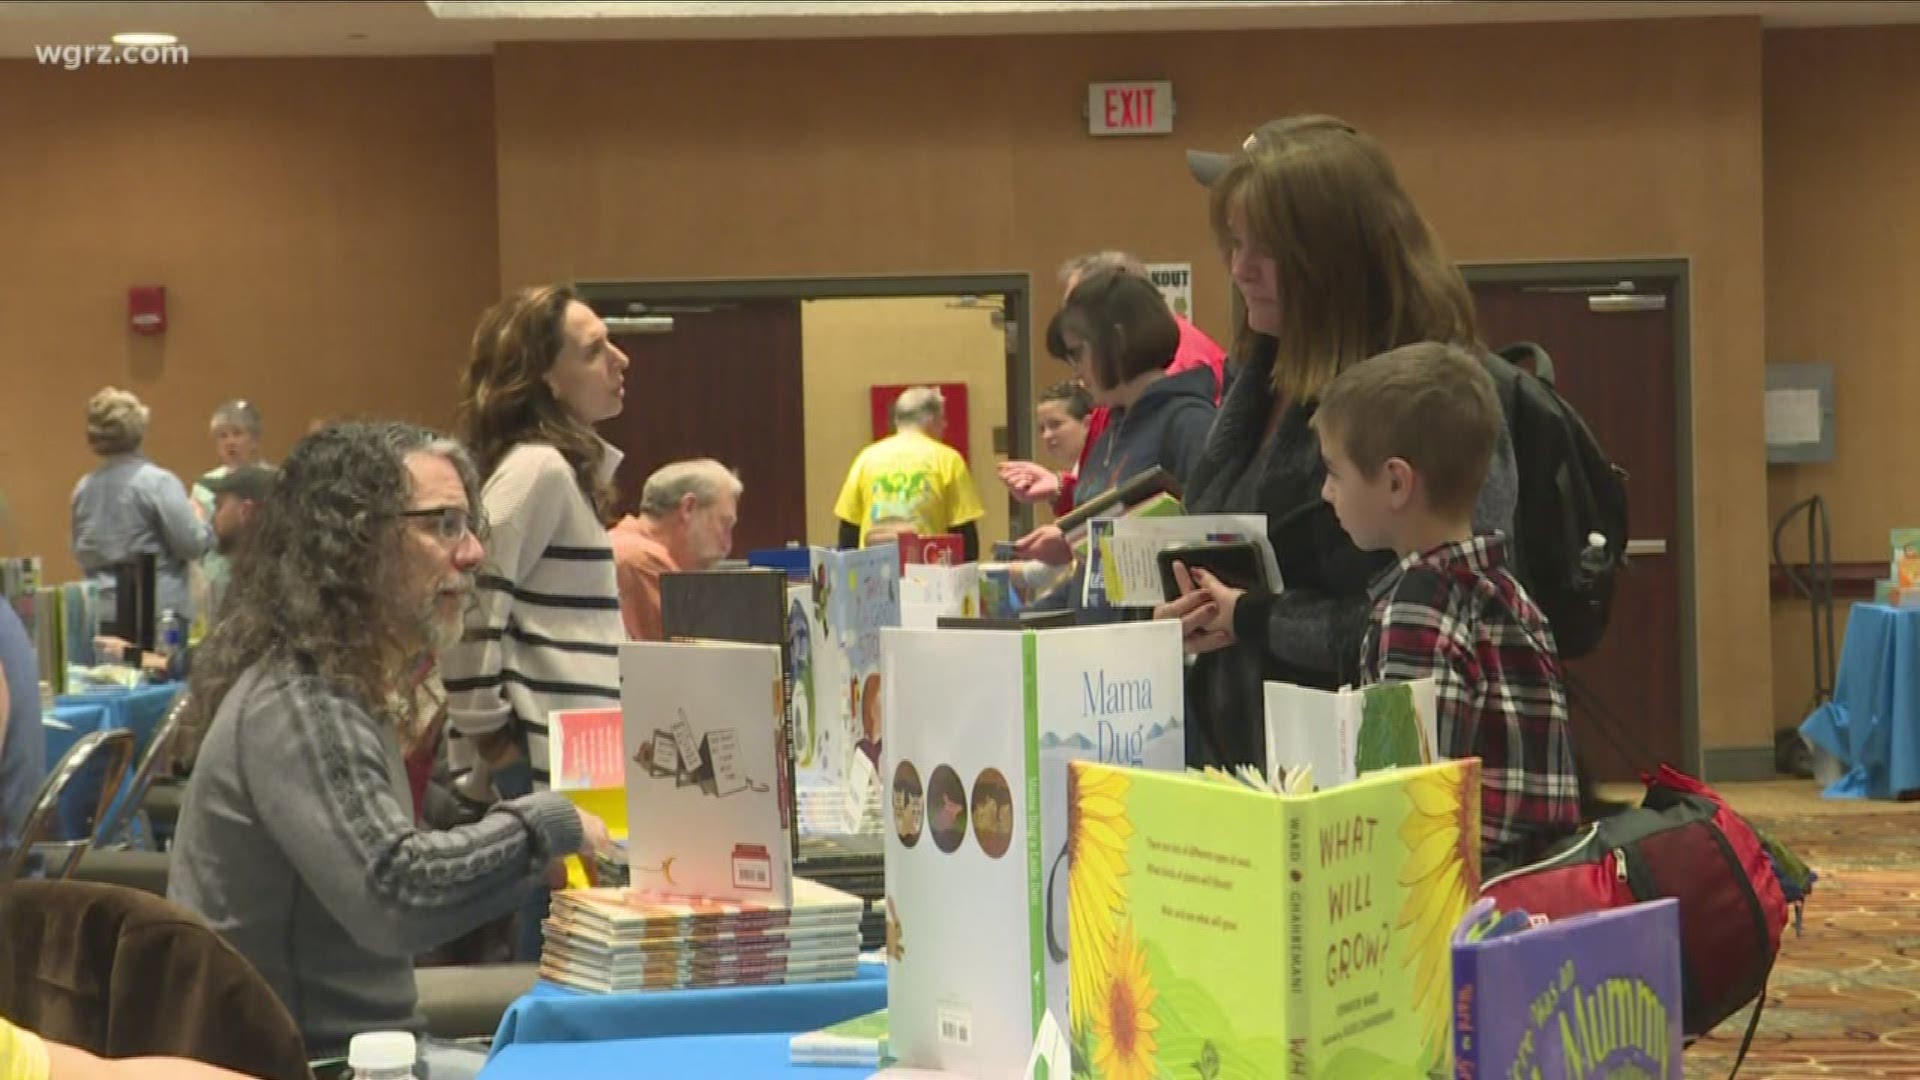 The expo had close to 200 books to give away during the event, and it had breakout sessions for children, parents, and teachers.